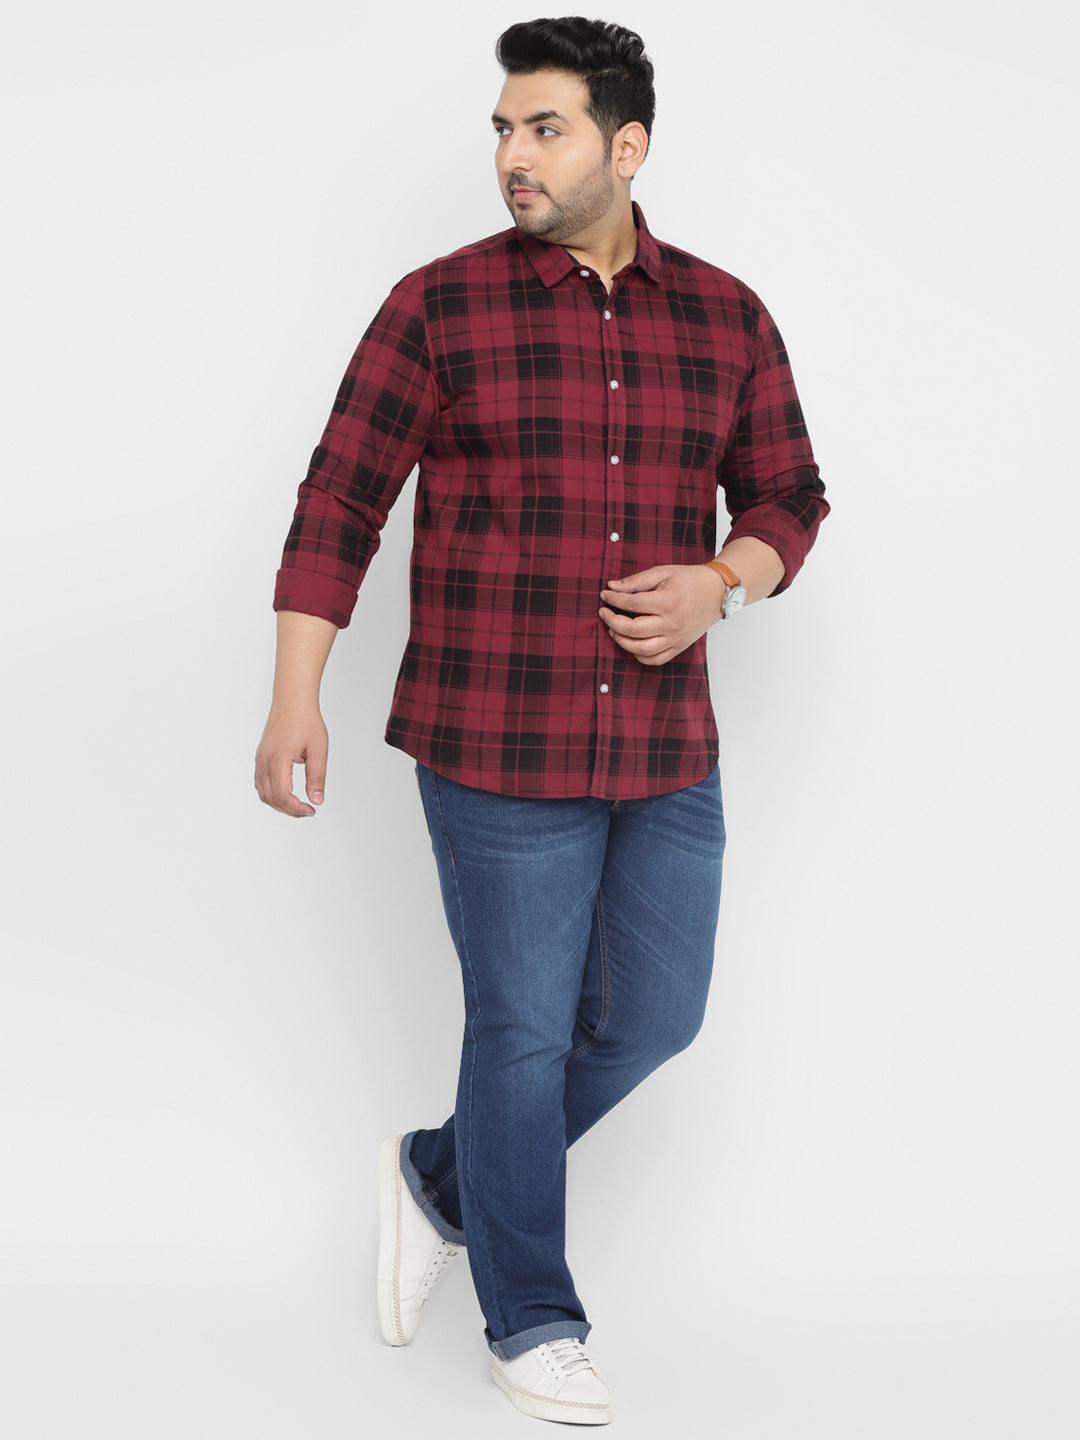 Urbano Plus Men's Red Cotton Full Sleeve Regular Fit Casual Checkered Shirt